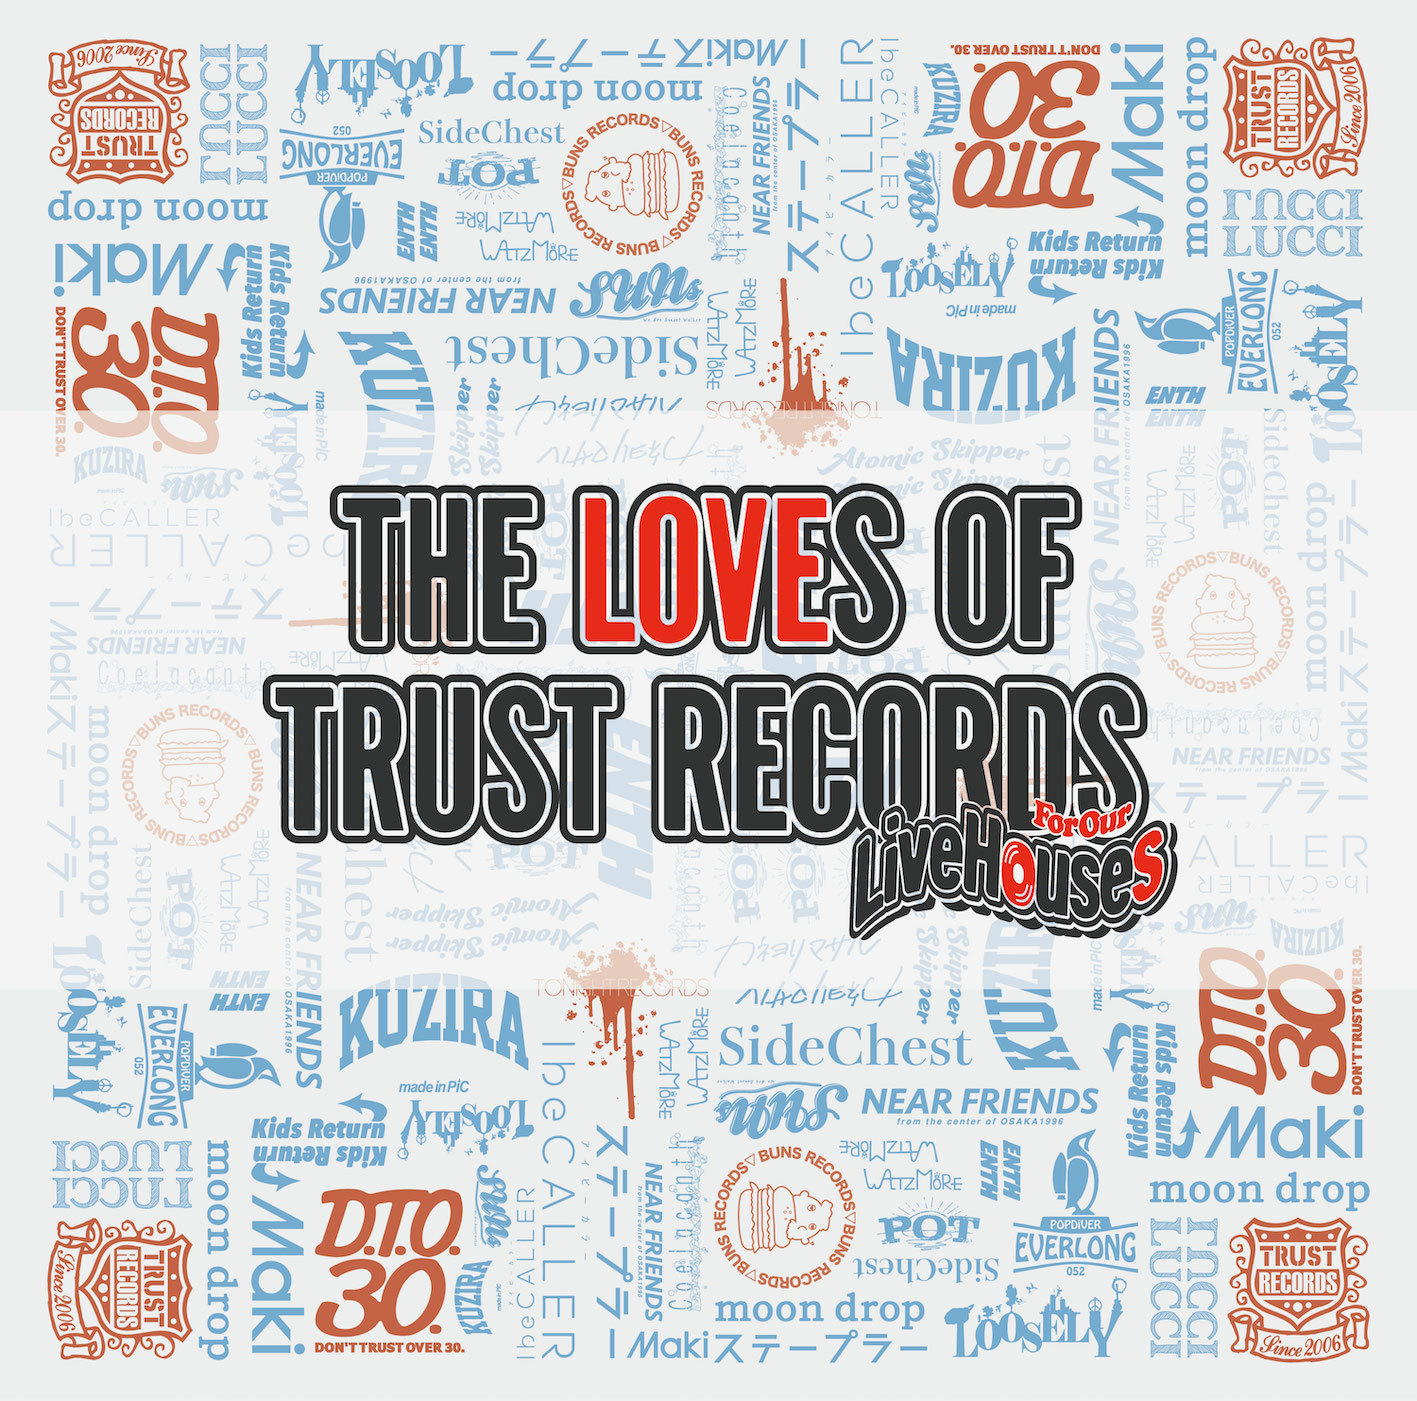 THE LOVES OF TRUST RECORDS